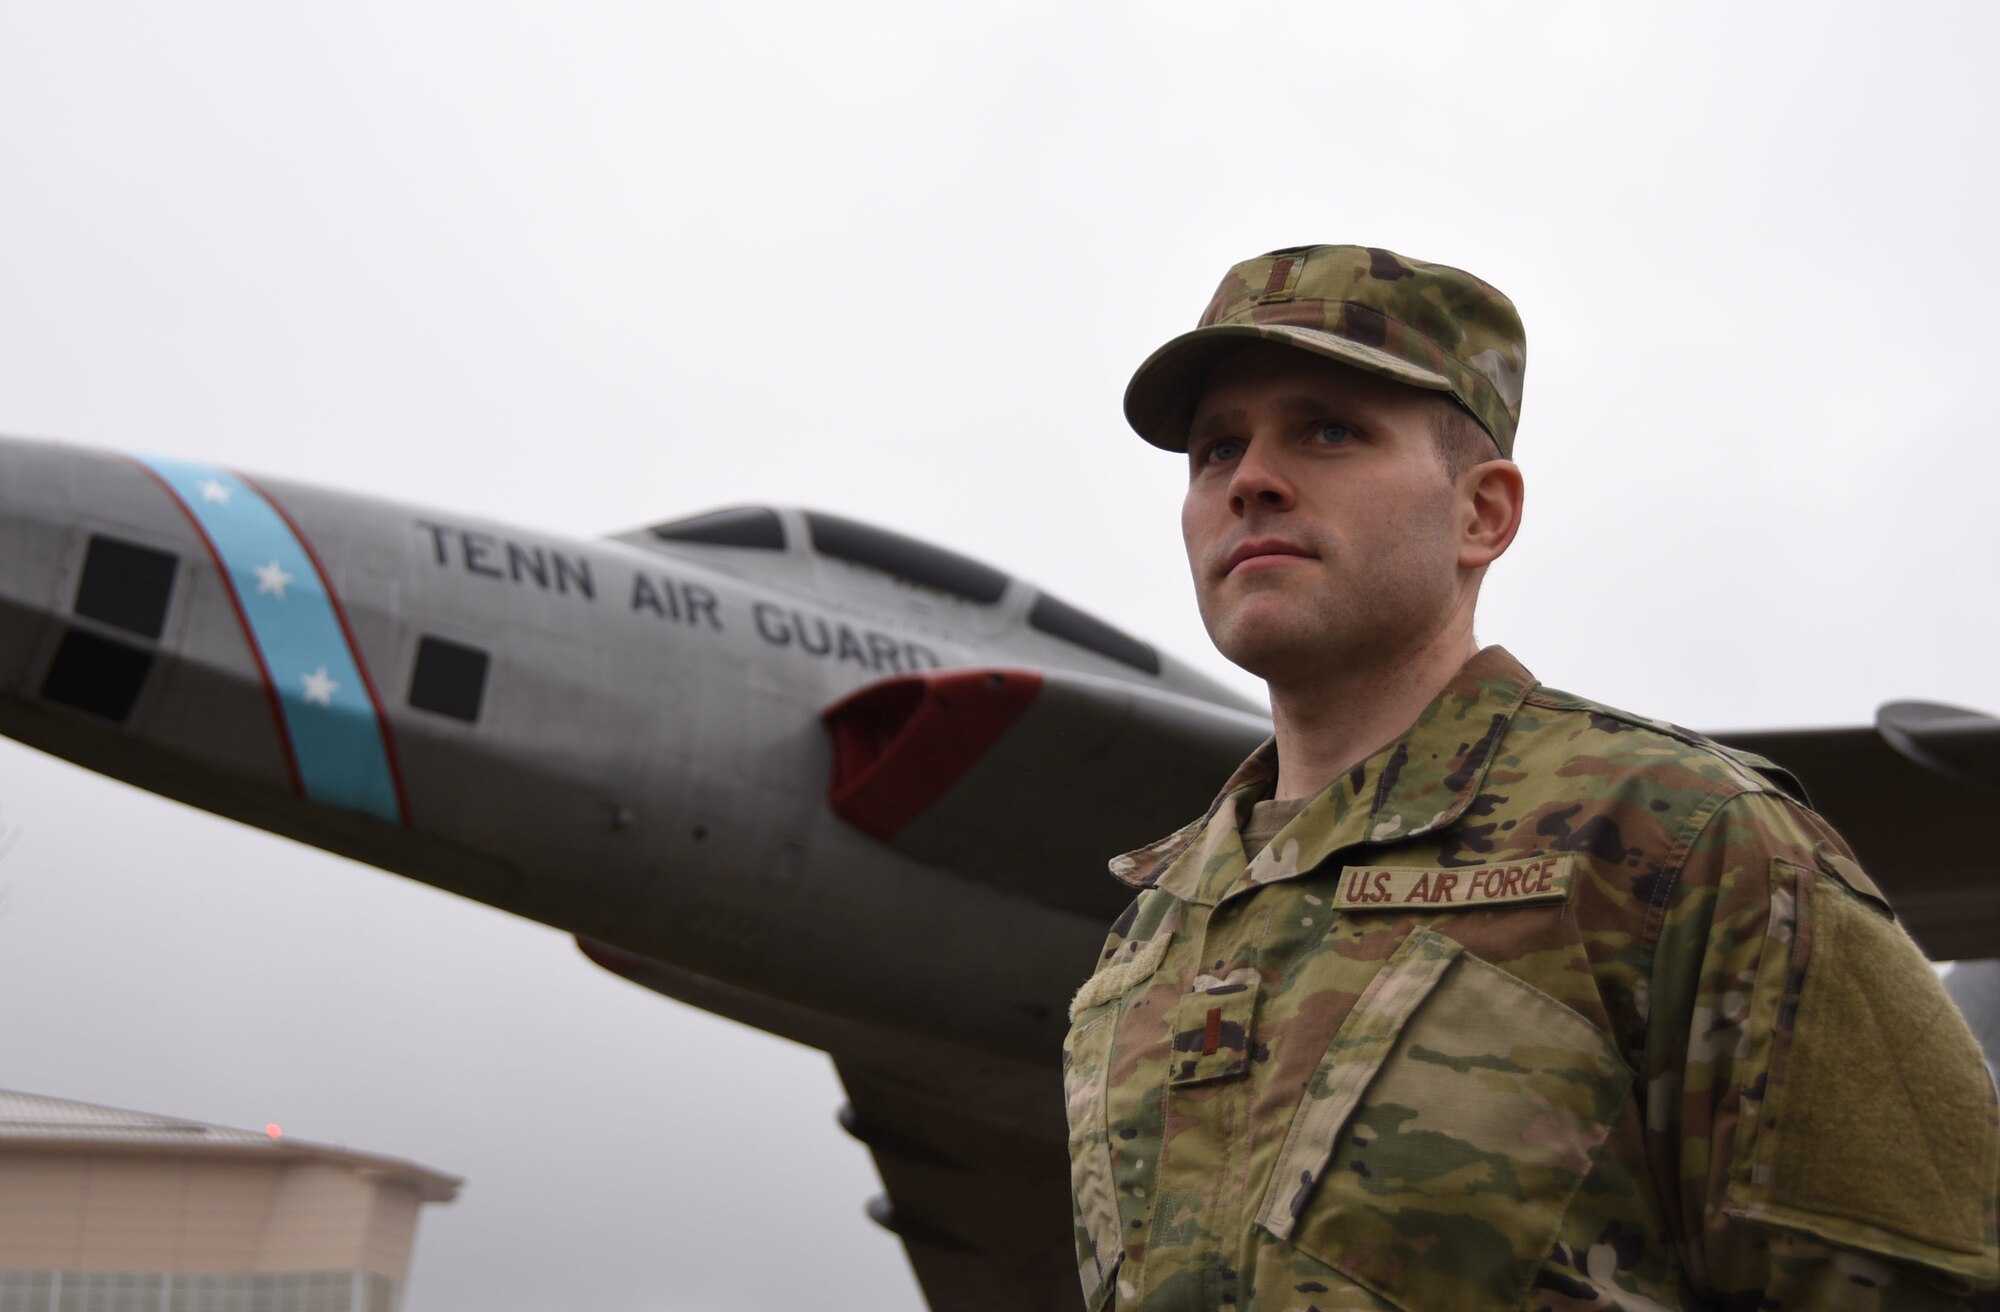 U.S. Air Force 2nd Lt. William, a flight commander at the 118th Wing, Tennessee Air National Guard, poses for a photo on Jan. 13, 2019, at Berry Field Air National Guard Base, Nashville. William used the education and opportunities provided by the Guard to spark a career change from the fast food industry to the cybersecurity field.